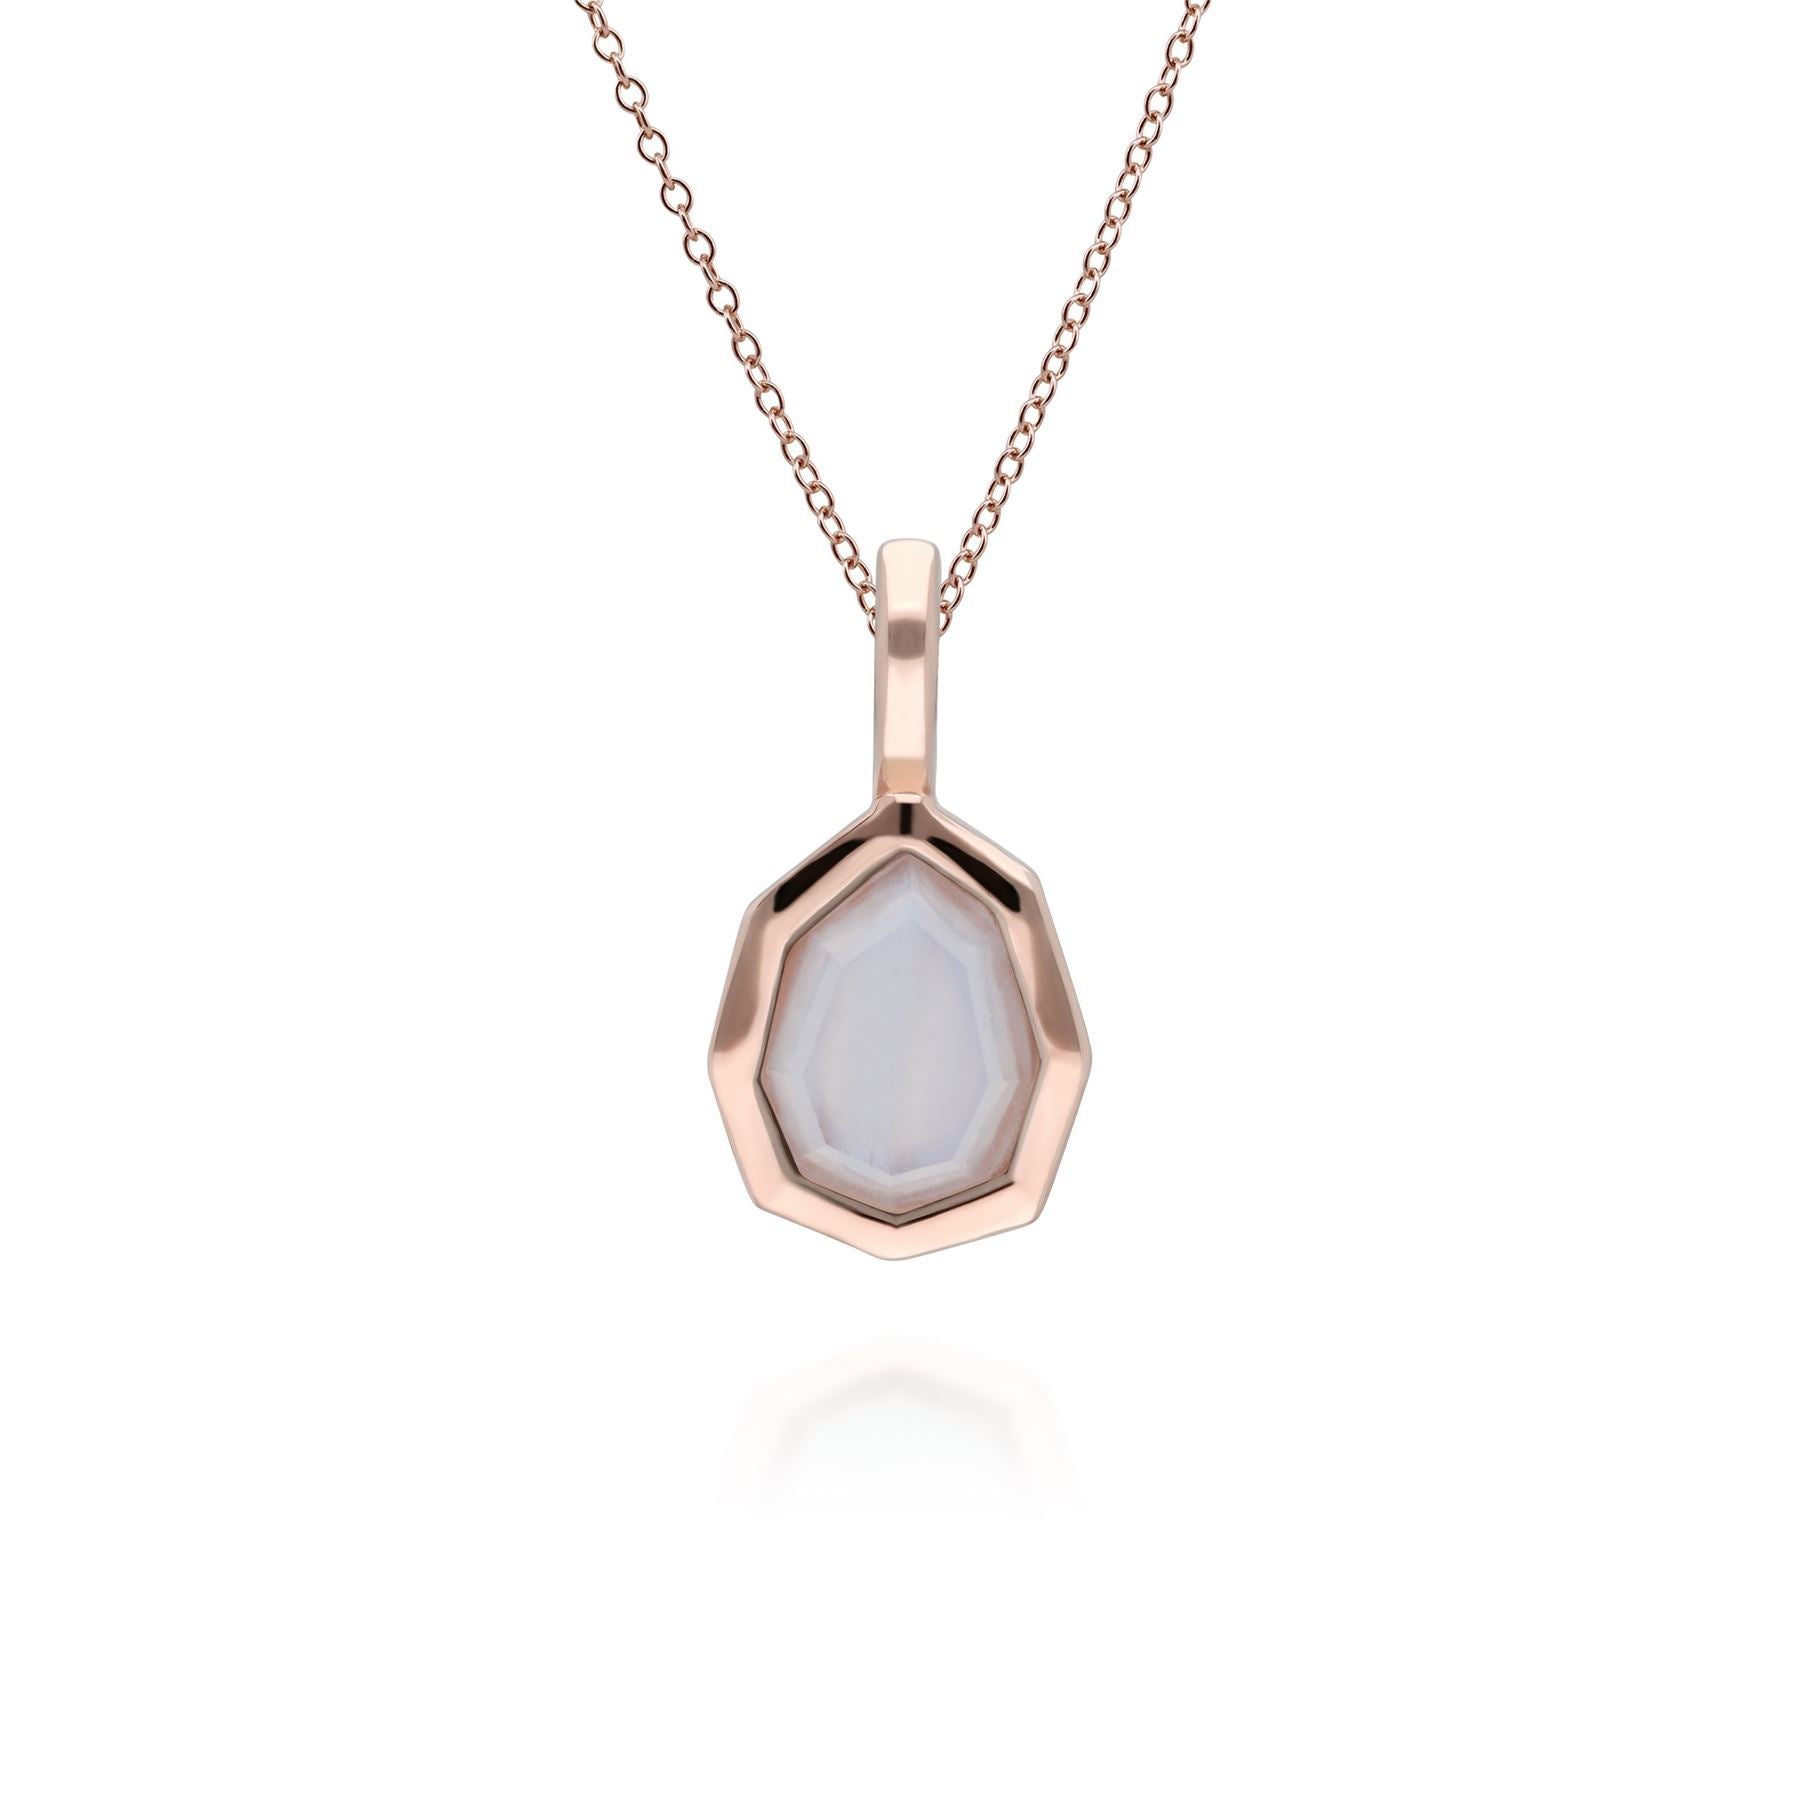 Irregular B Gem Blue Lace Agate Pendant in Rose Gold Plated Sterling Silver